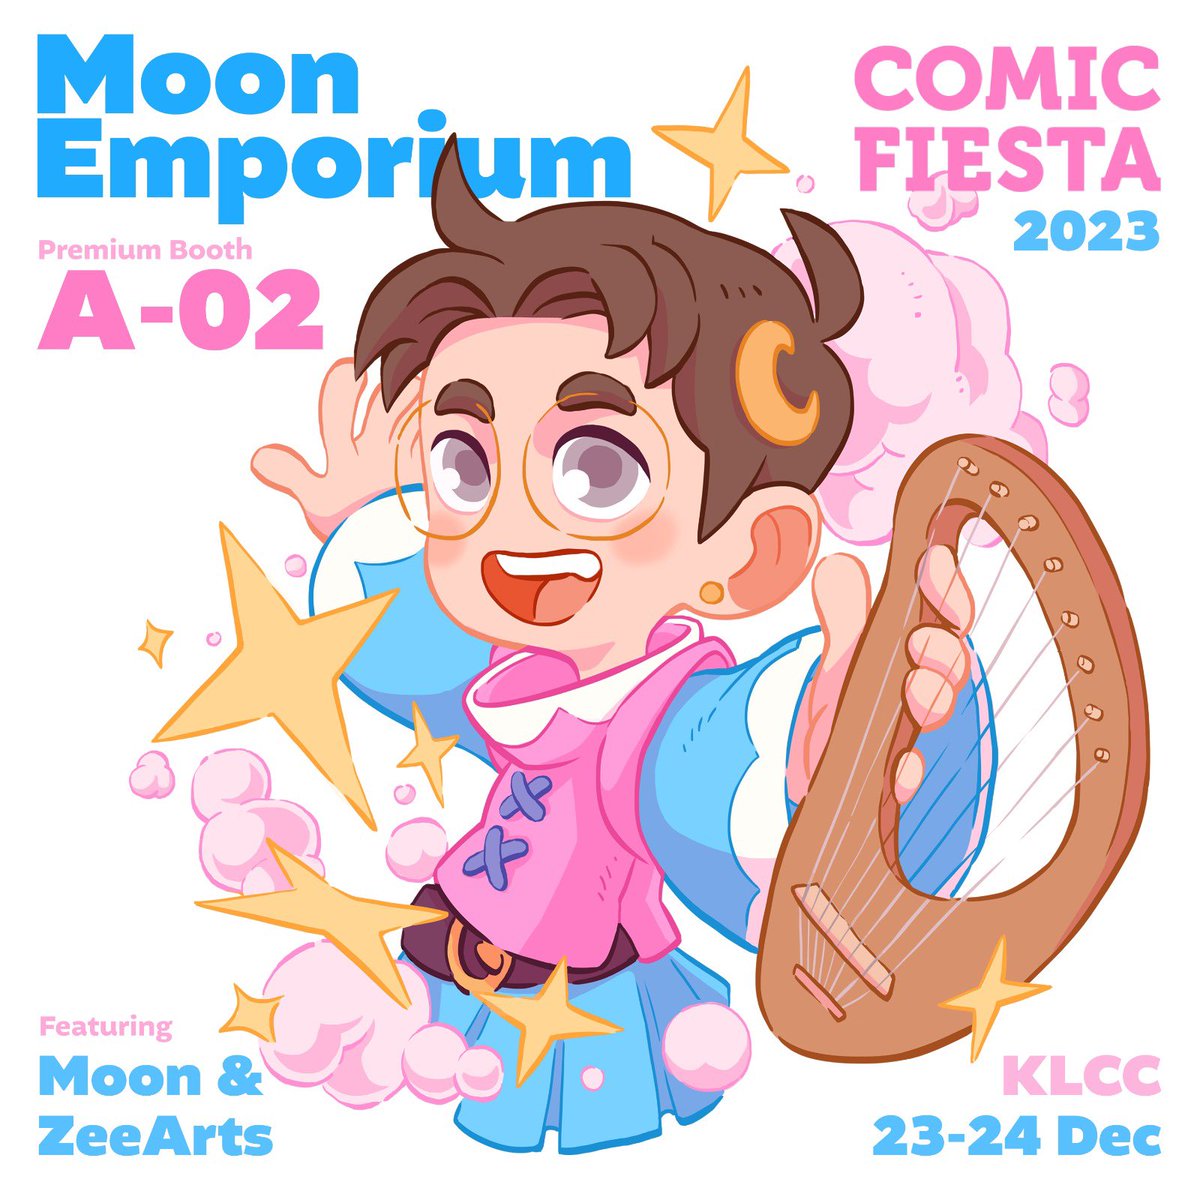 See you guys at @comicfiesta this weekend! ✨